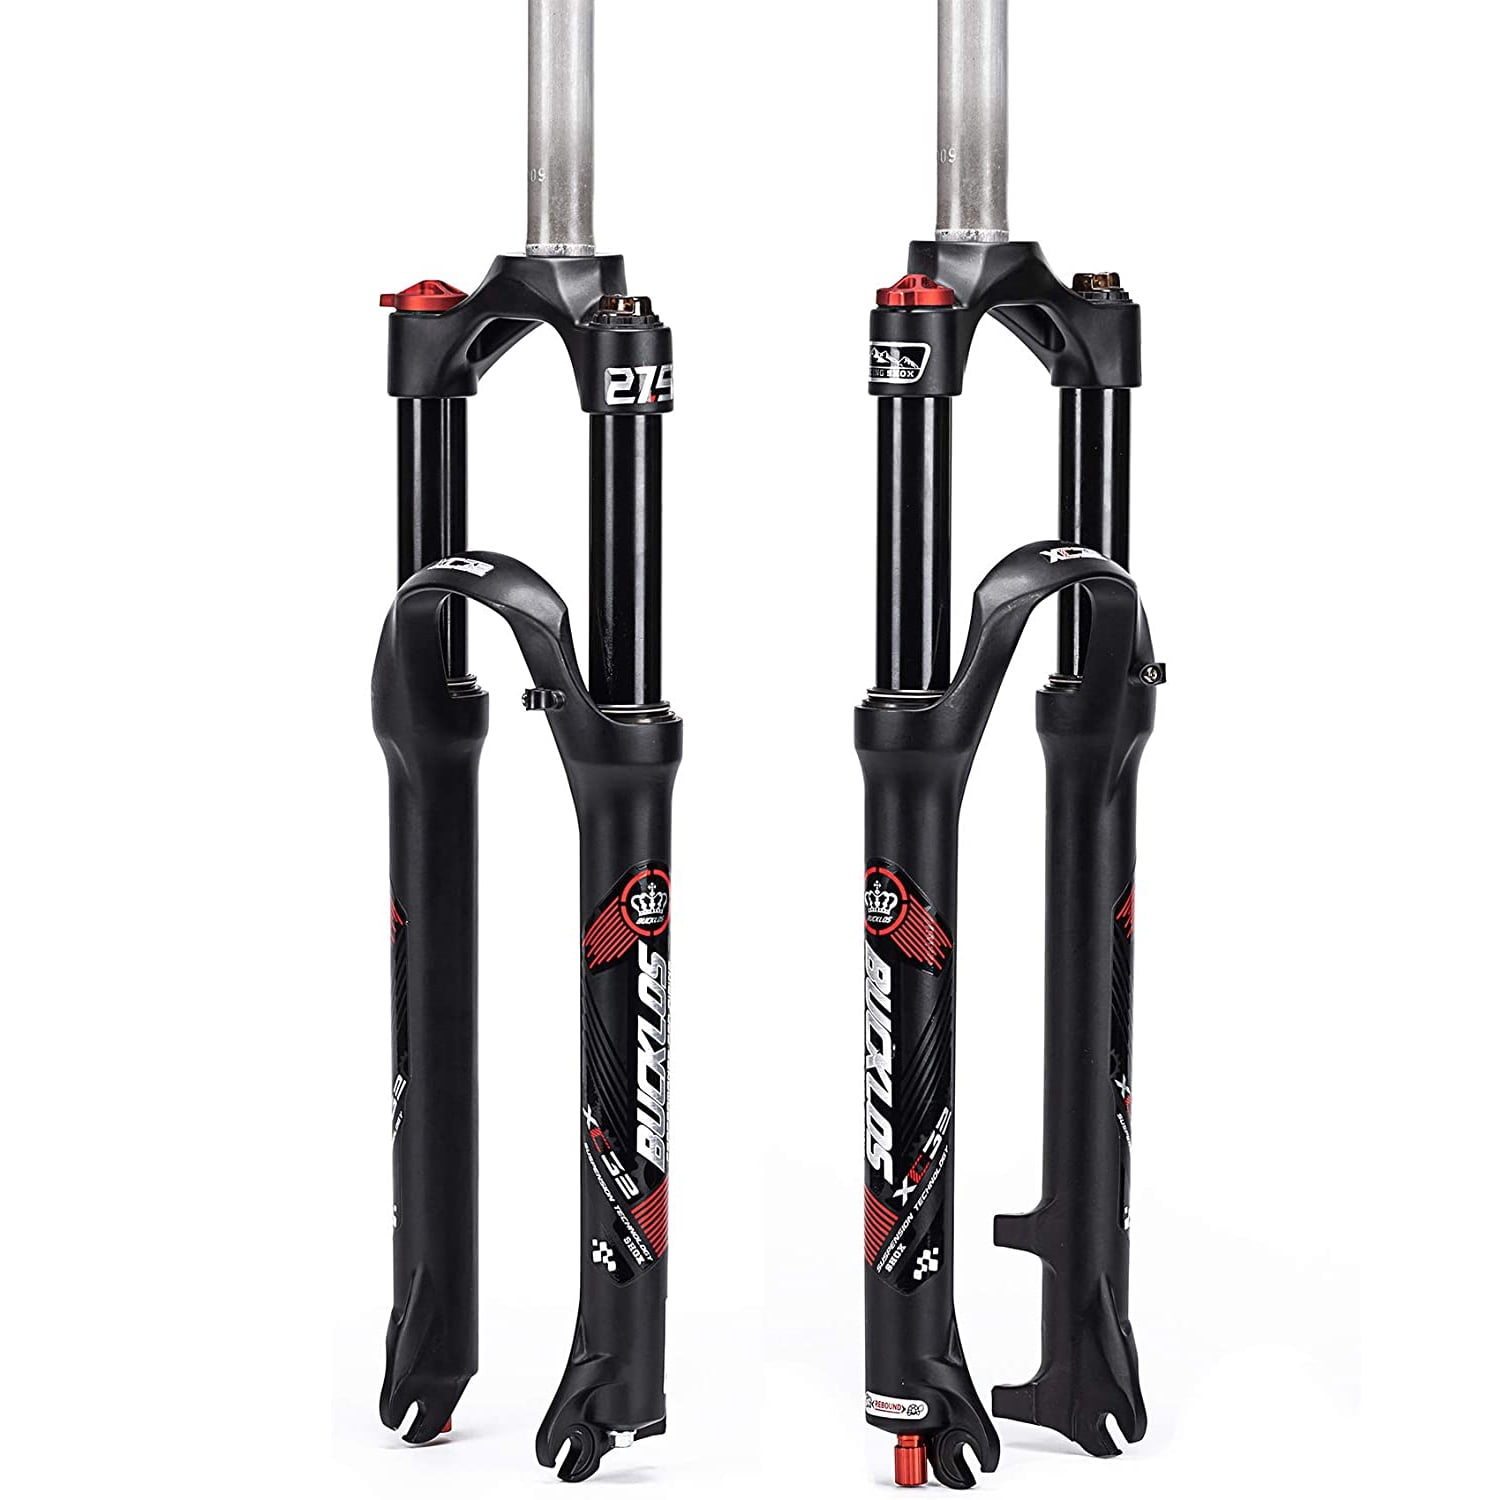 26/27.5/29inch Bike Fork MTB Mountain Bicycle Light Weight Air Suspension Forks 